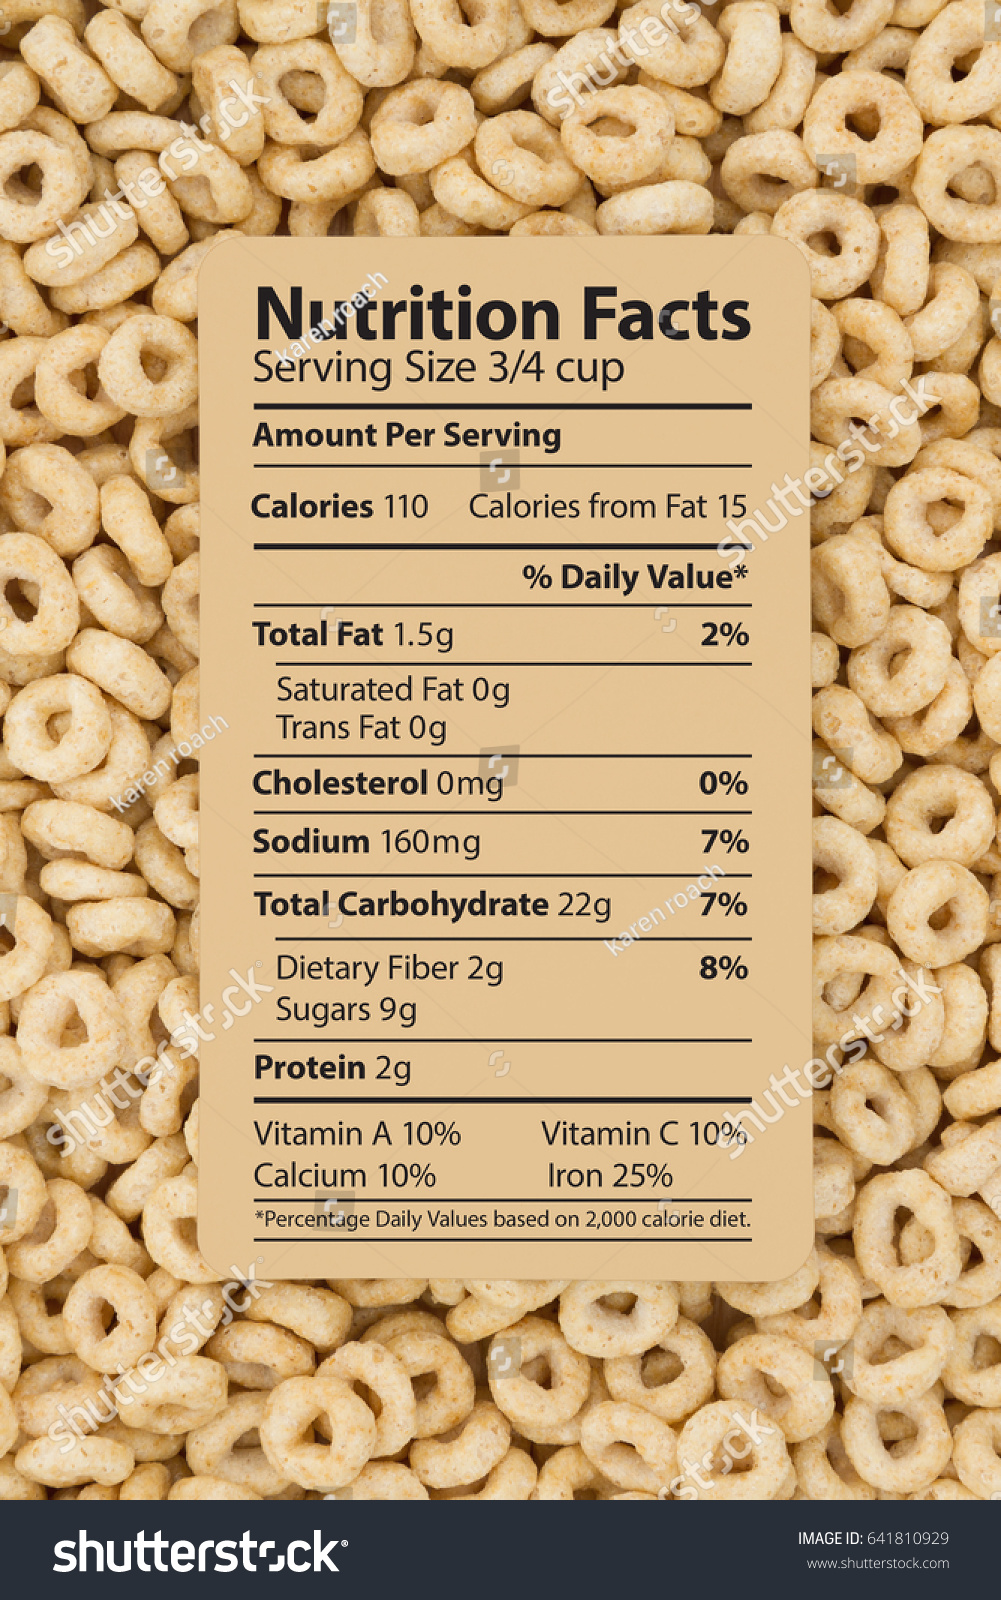 Cereal is a healthy breakfast, Healthy oats cereal with text of a nutrition label on a card #641810929